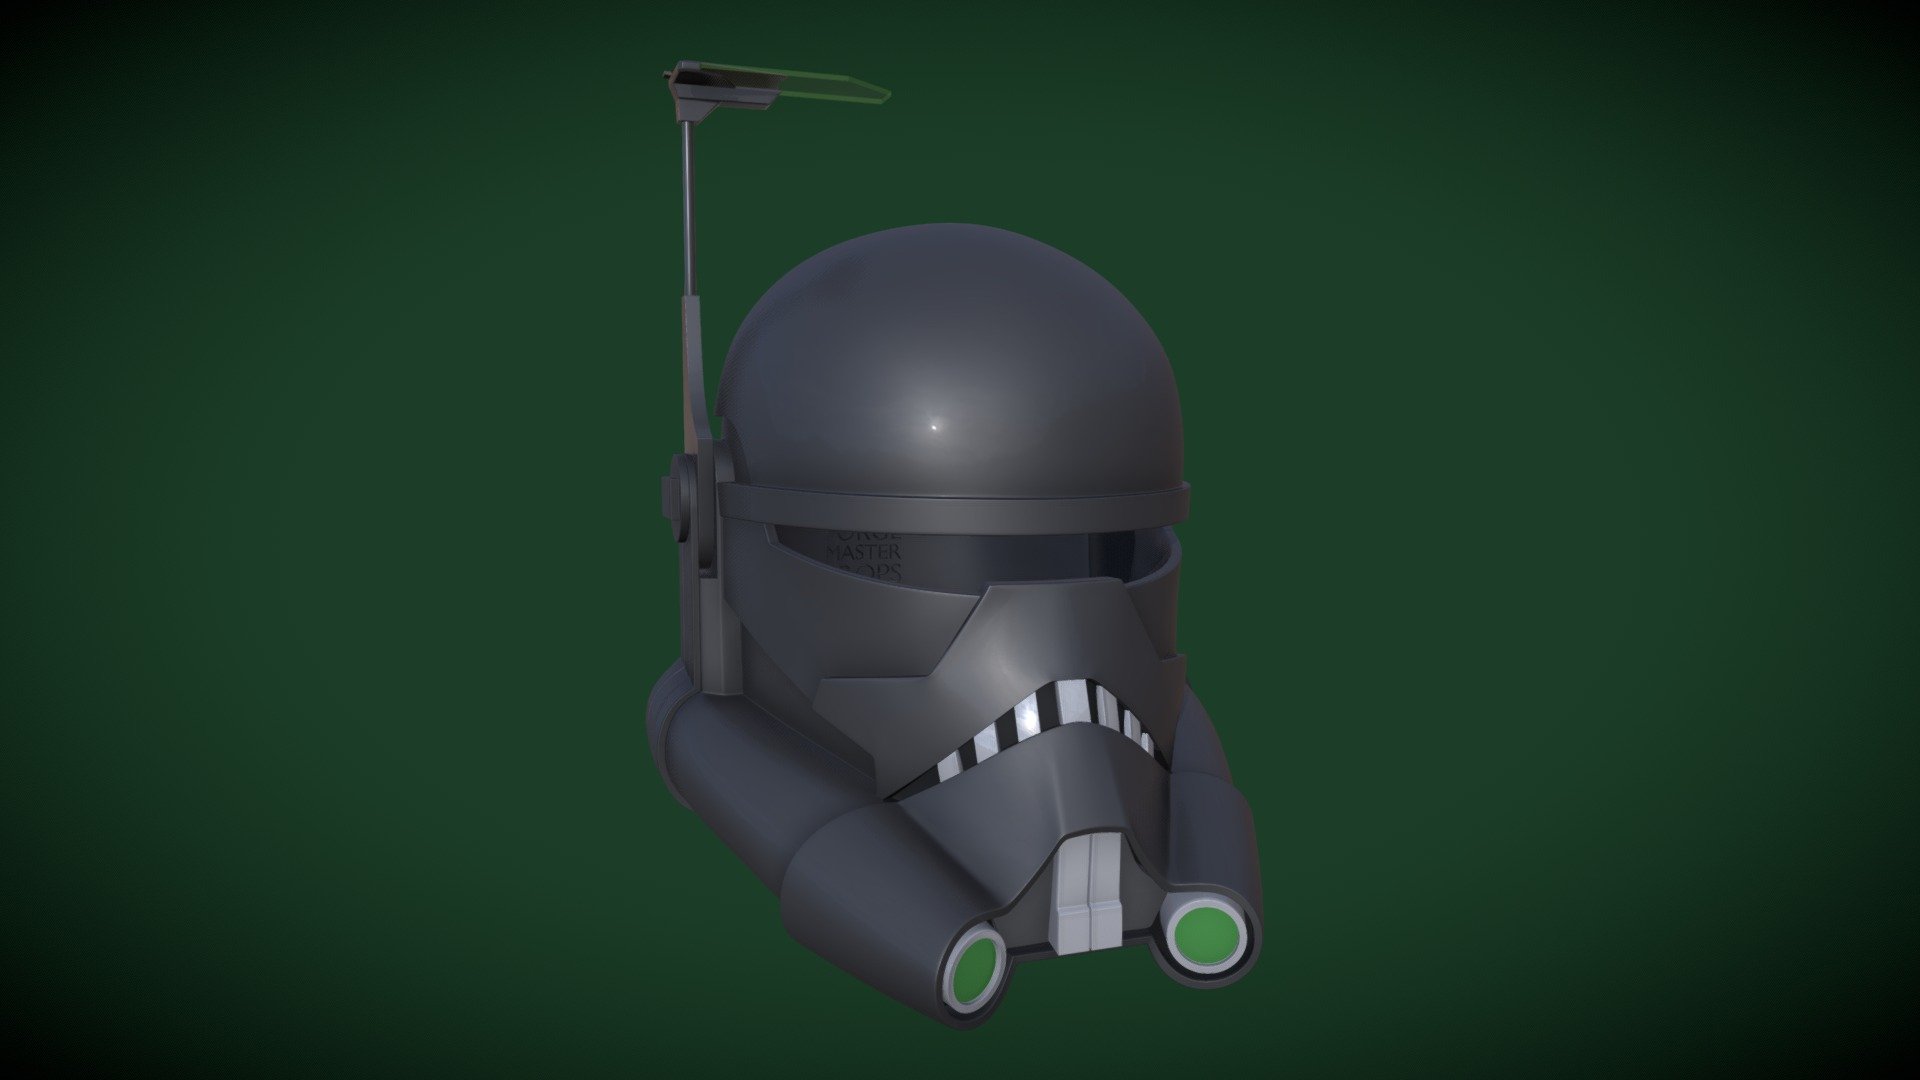 Imperial crosshair helmet as seen on the bad batch series on Disney+
Model ready for 3D printing for cosplay 3d model